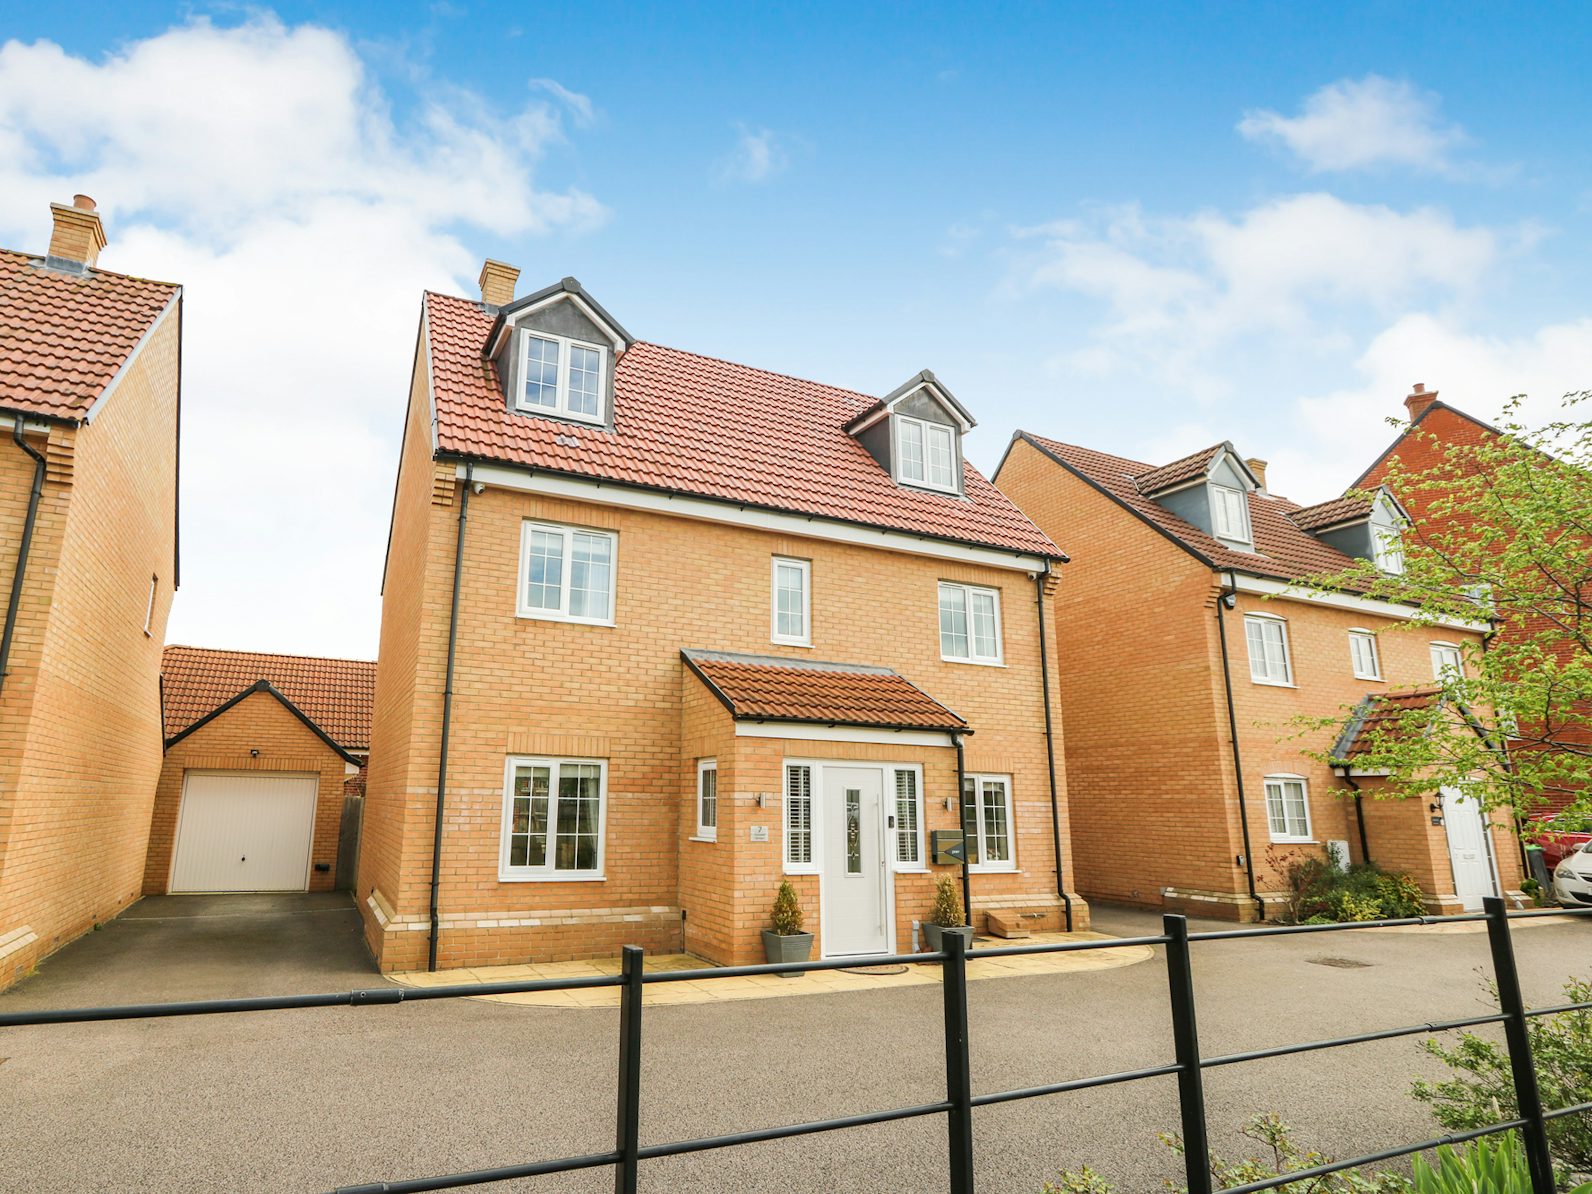 Detached House for sale on Parkview Terrace Bedford, MK42